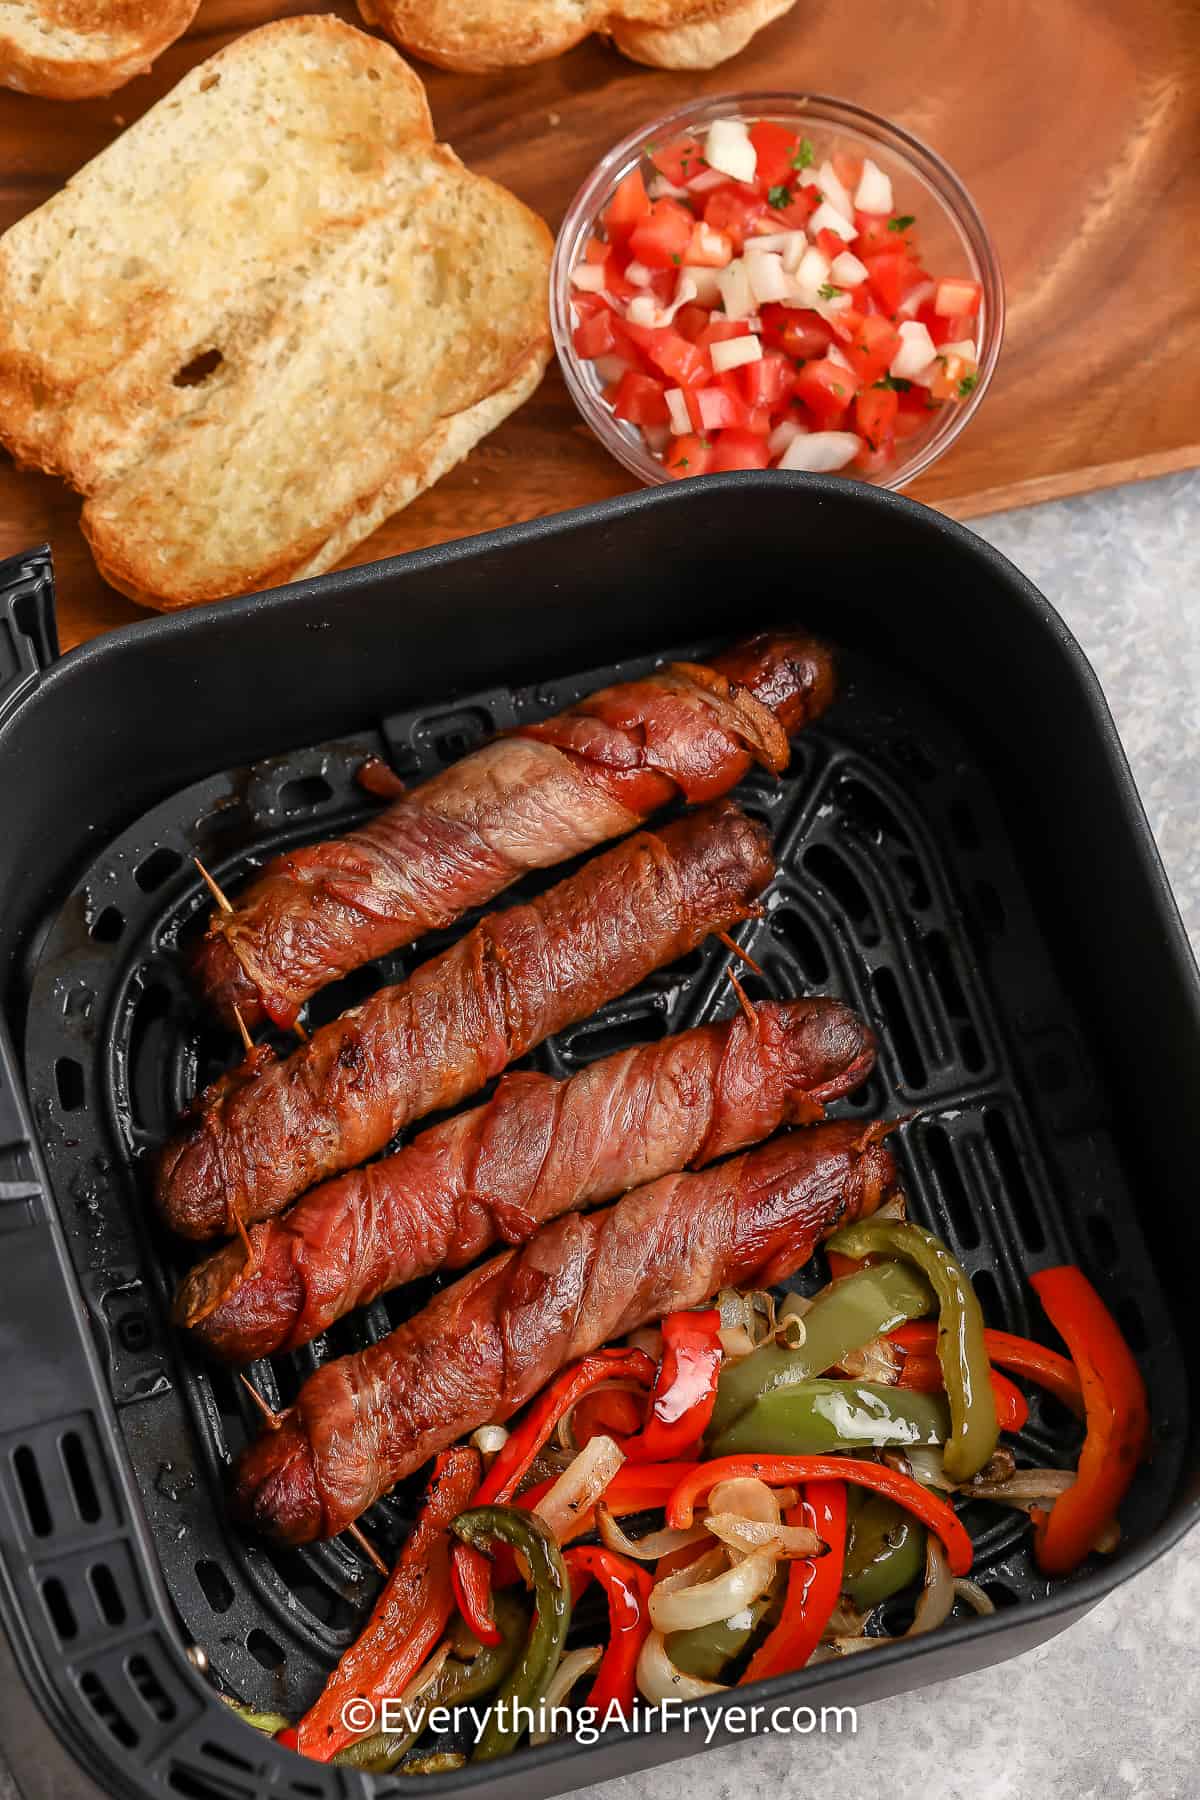 cooked hot dogs and onions and peppers in an air fryer tray